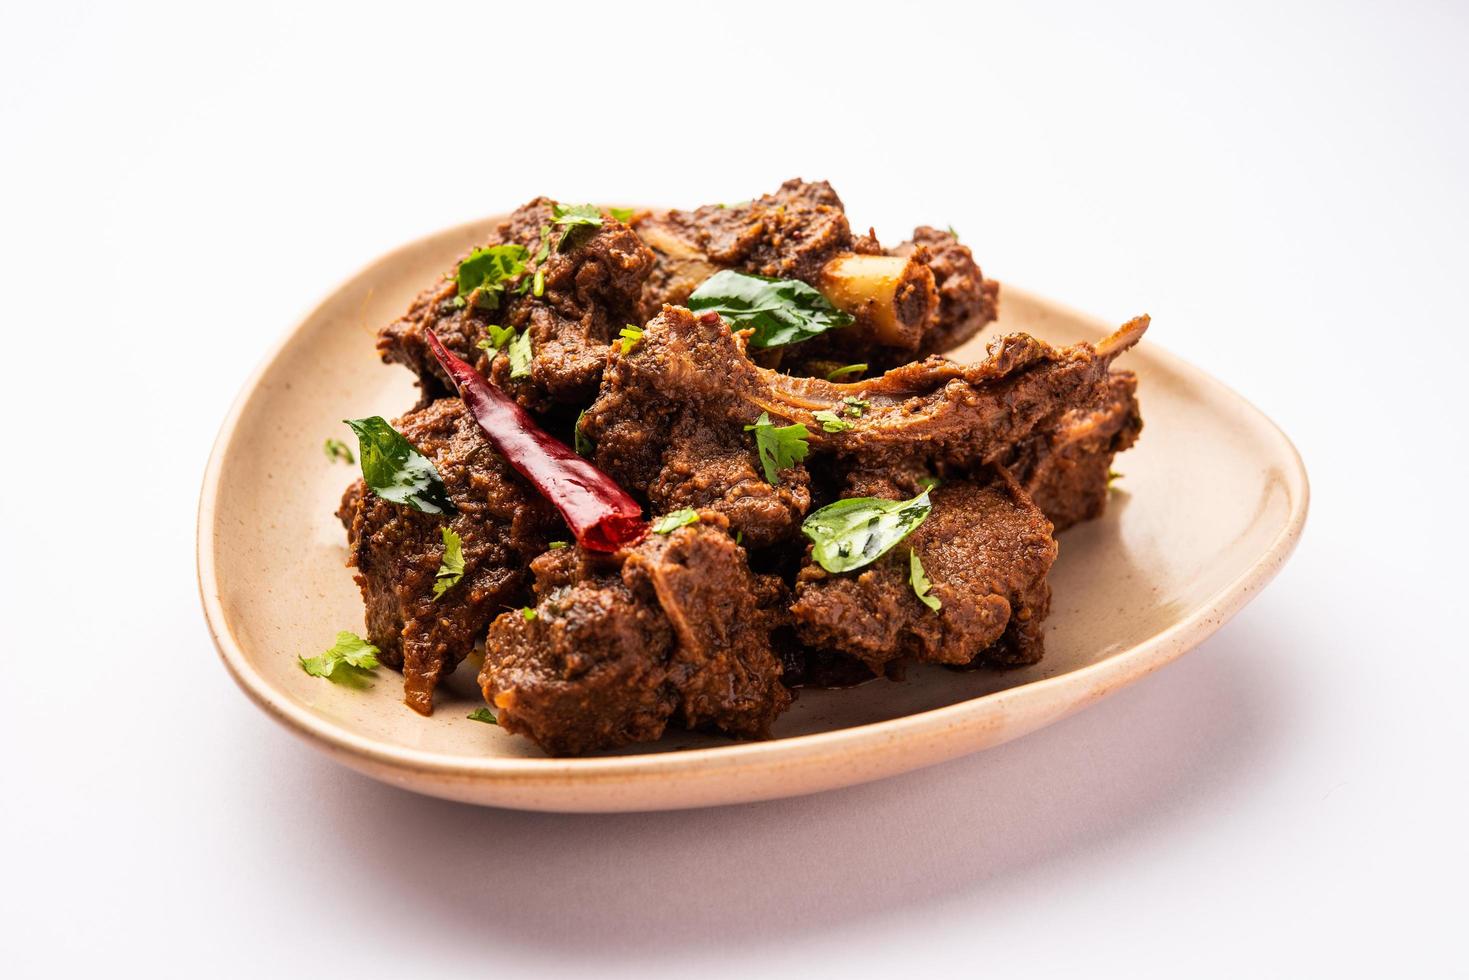 Sukha mutton or chicken, dry spicy Murgh or goat meat served in a plate or bowl photo